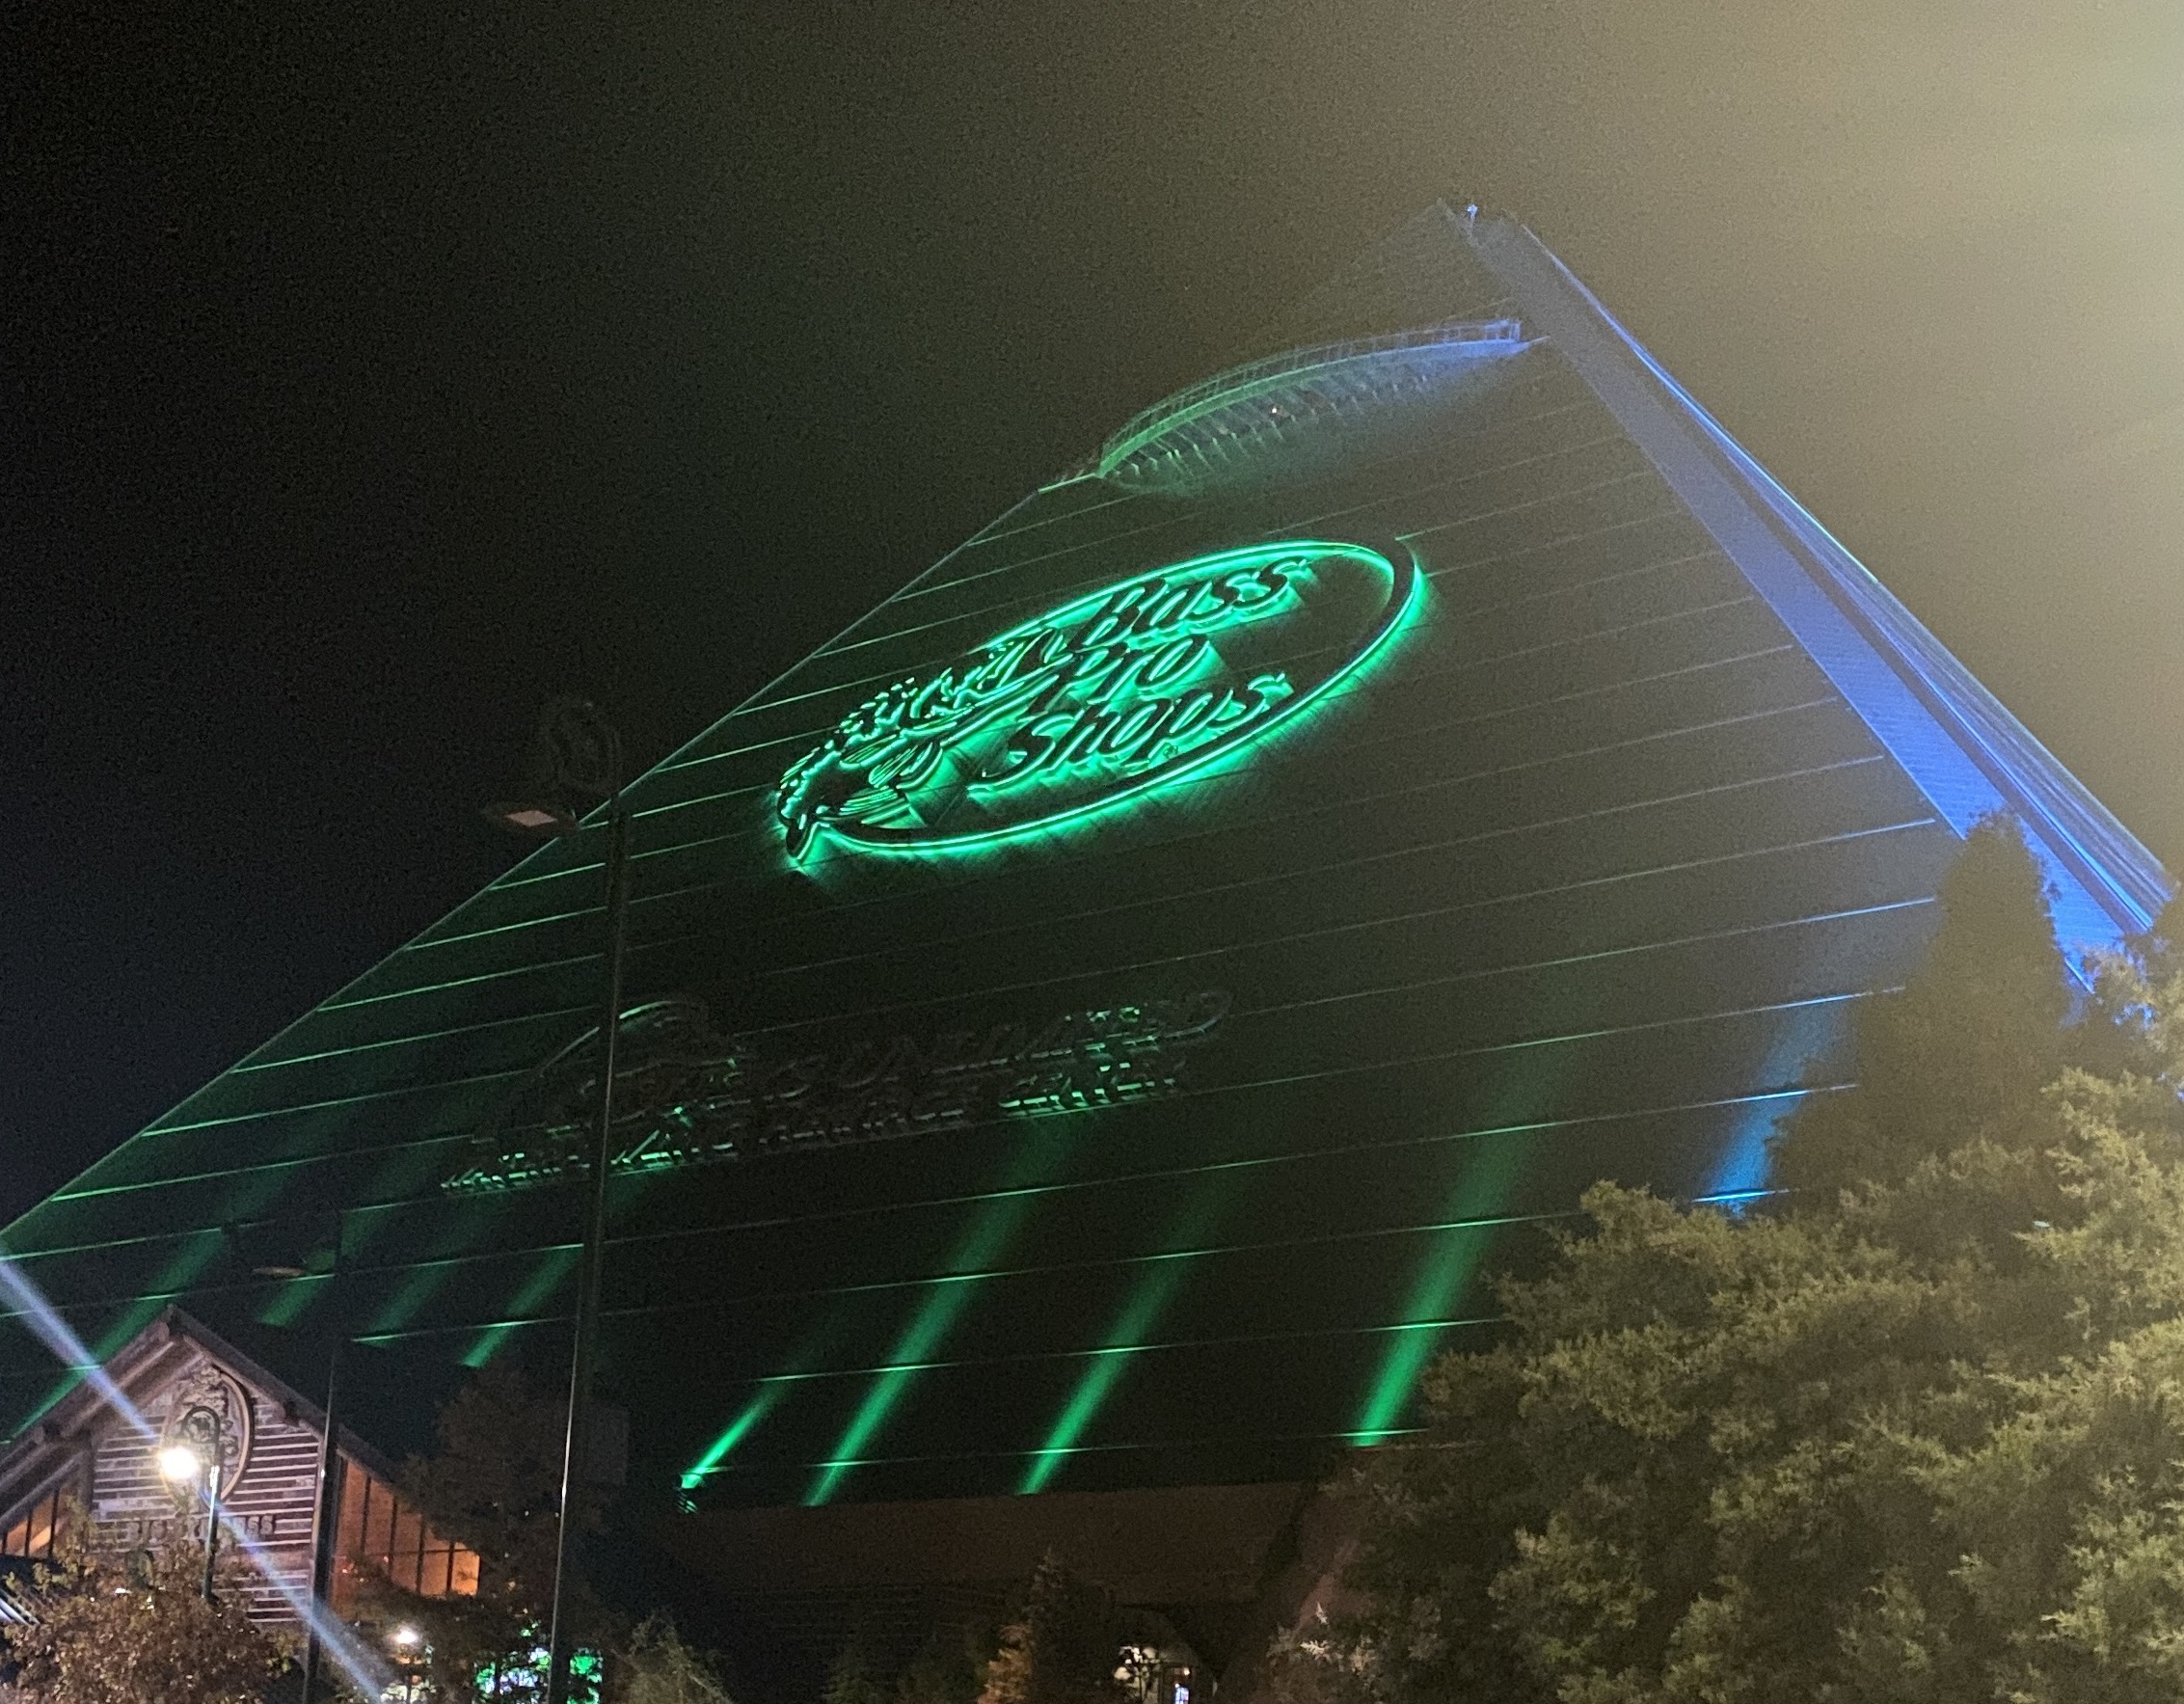 A photo of the Bass Pro Shops Pyramid at night